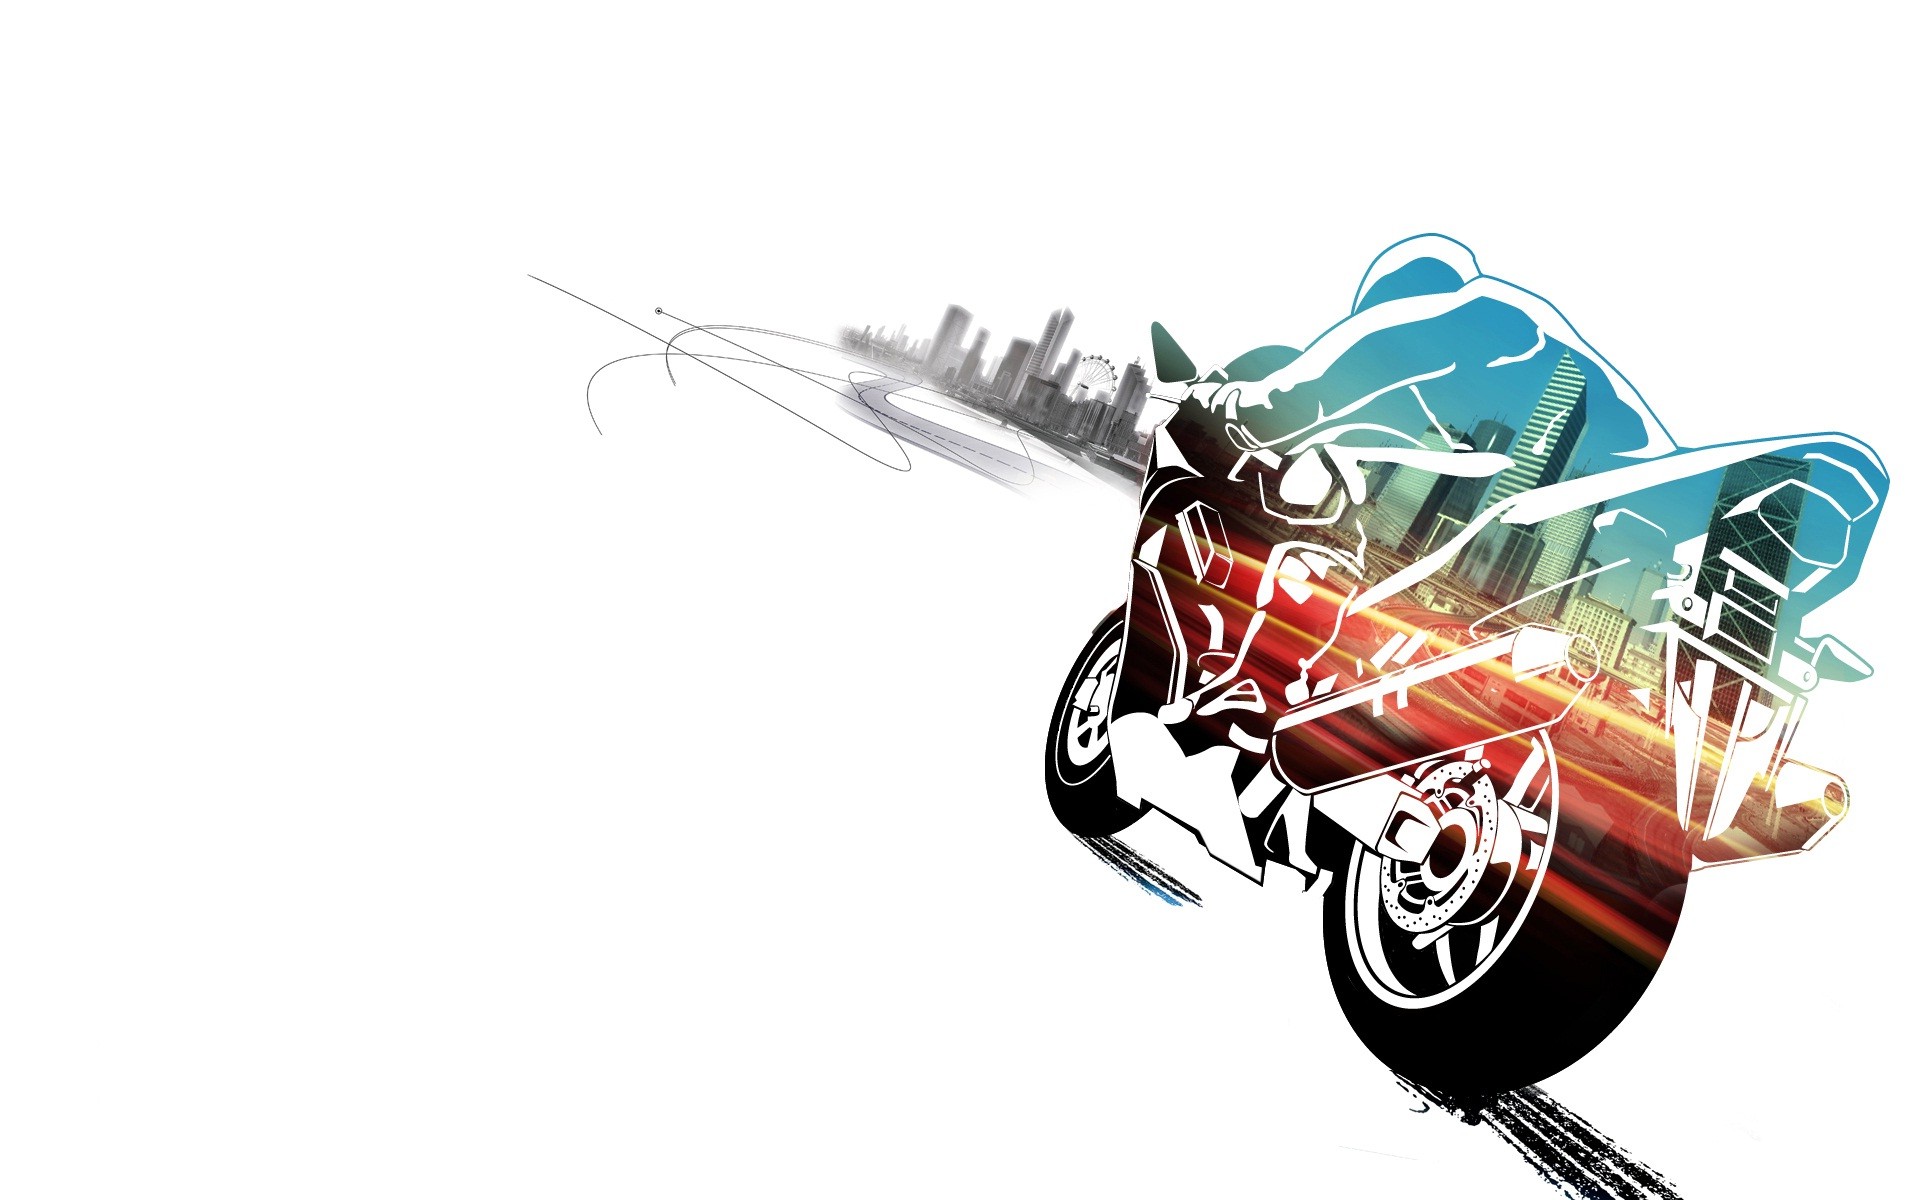 Burnout video game burnout paradise wallpapers hd desktop and mobile backgrounds